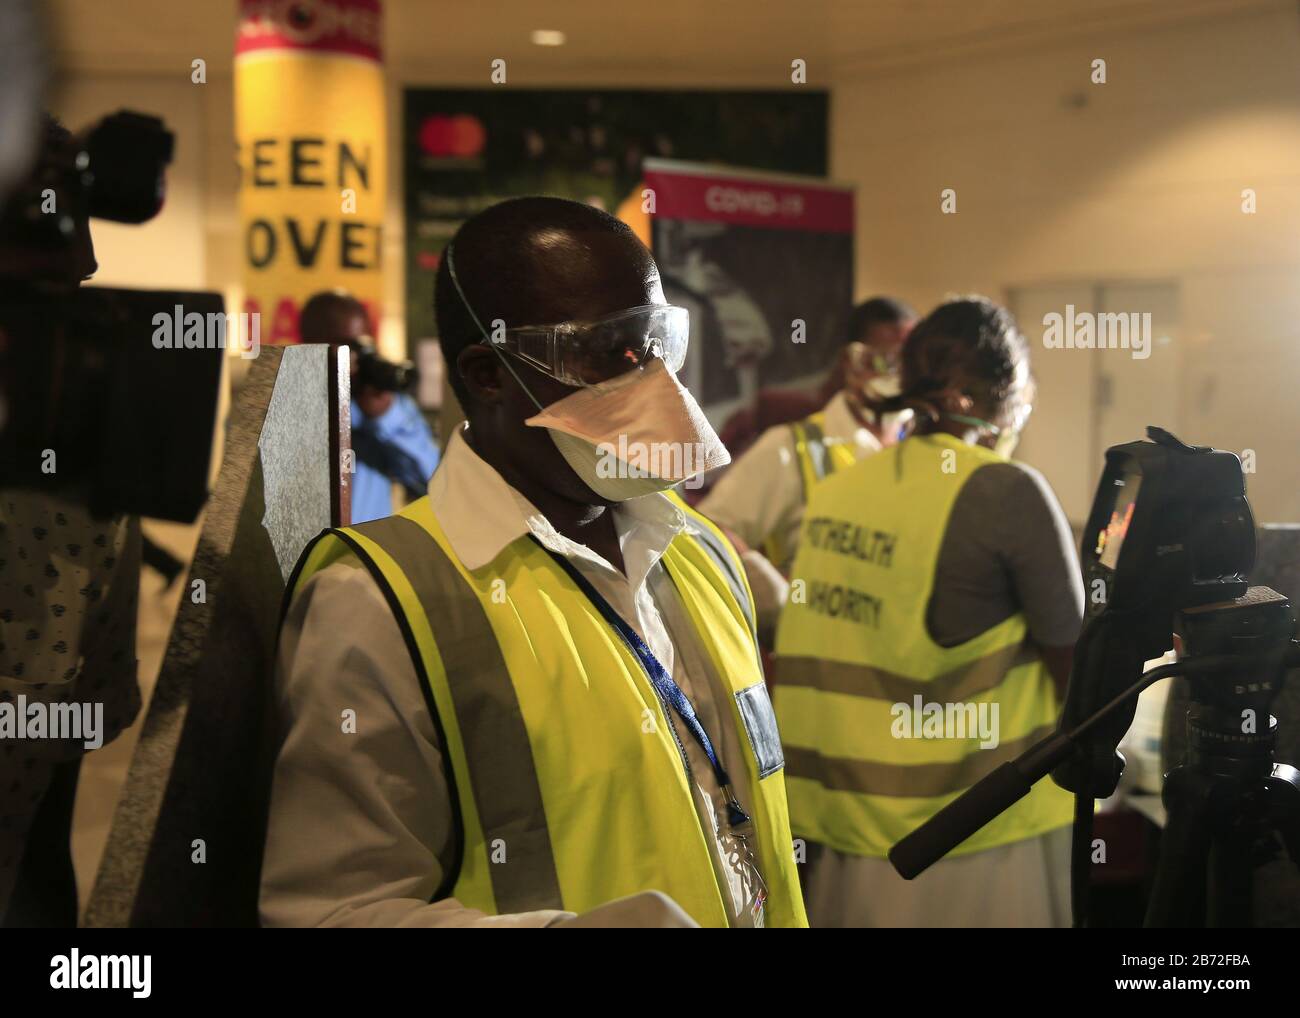 Beijing, March 11. 13th Mar, 2020. Staff wearing face masks work at the Robert Gabriel Mugabe International Airport in Harare, Zimbabwe, March 11, 2020. TO GO WITH XINHUA HEADLINES OF MARCH 13, 2020. Credit: Shaun Jusa/Xinhua/Alamy Live News Stock Photo